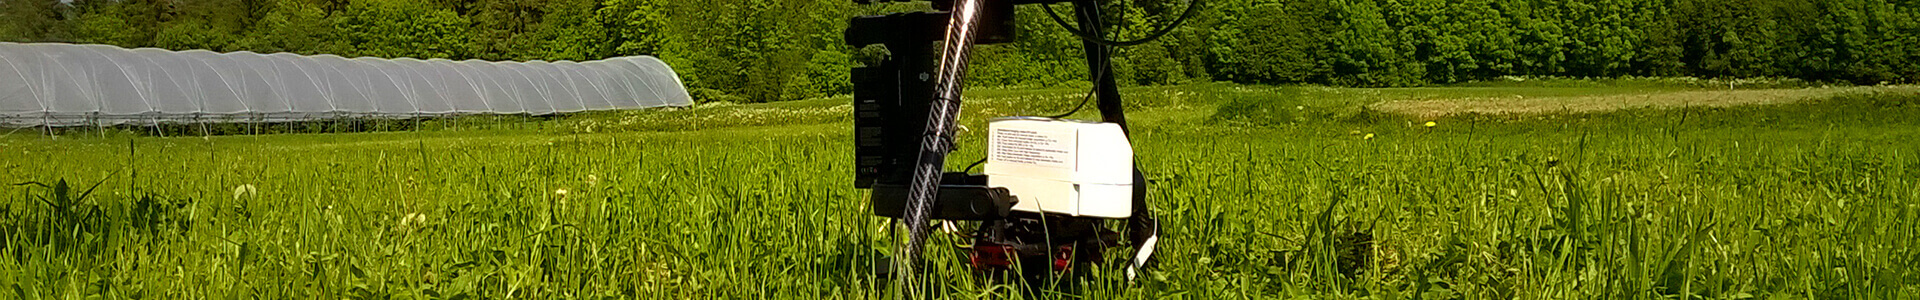 The picture shows a hyperspectral camera in the grass